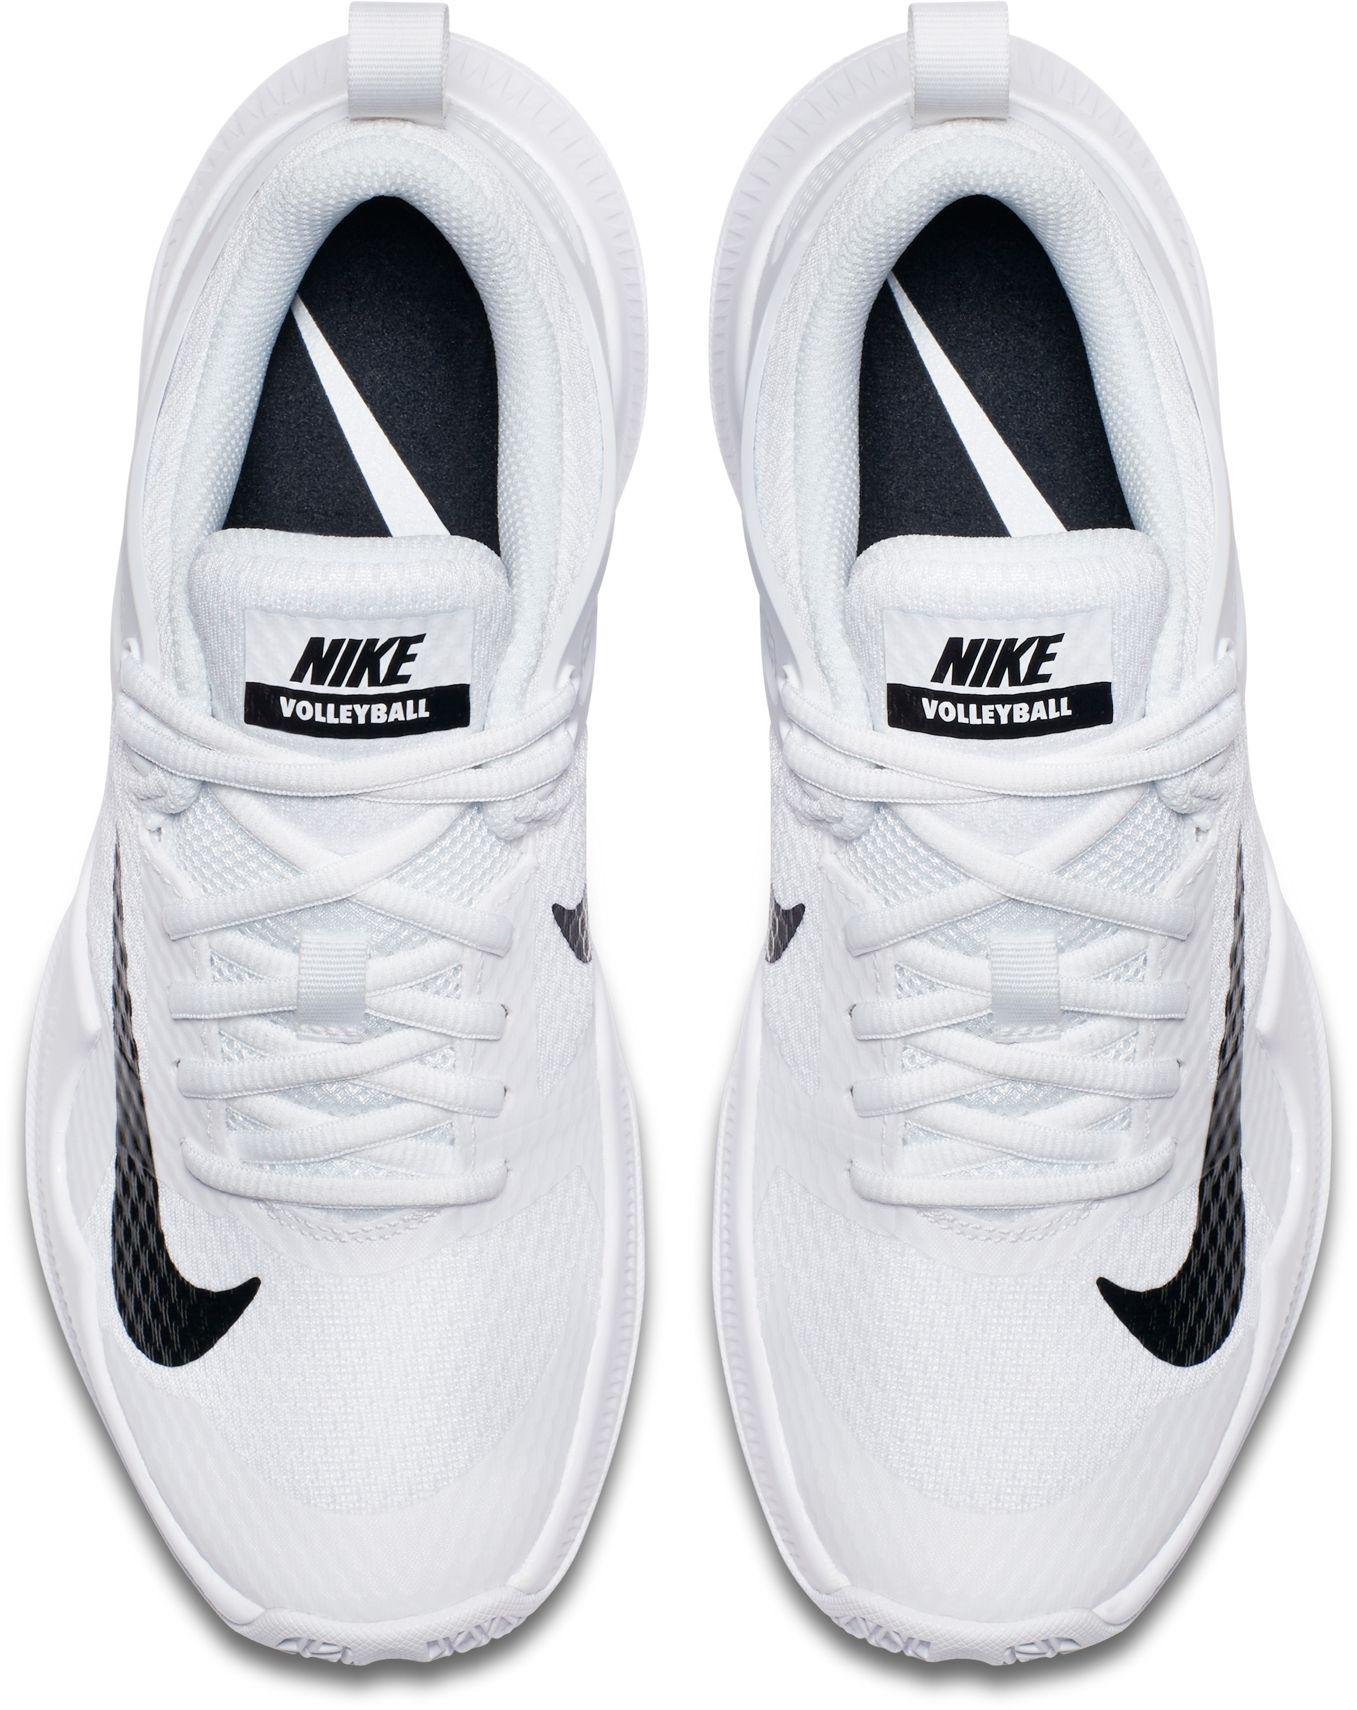 Lyst Nike Air Zoom Hyperace Volleyball Shoes in White